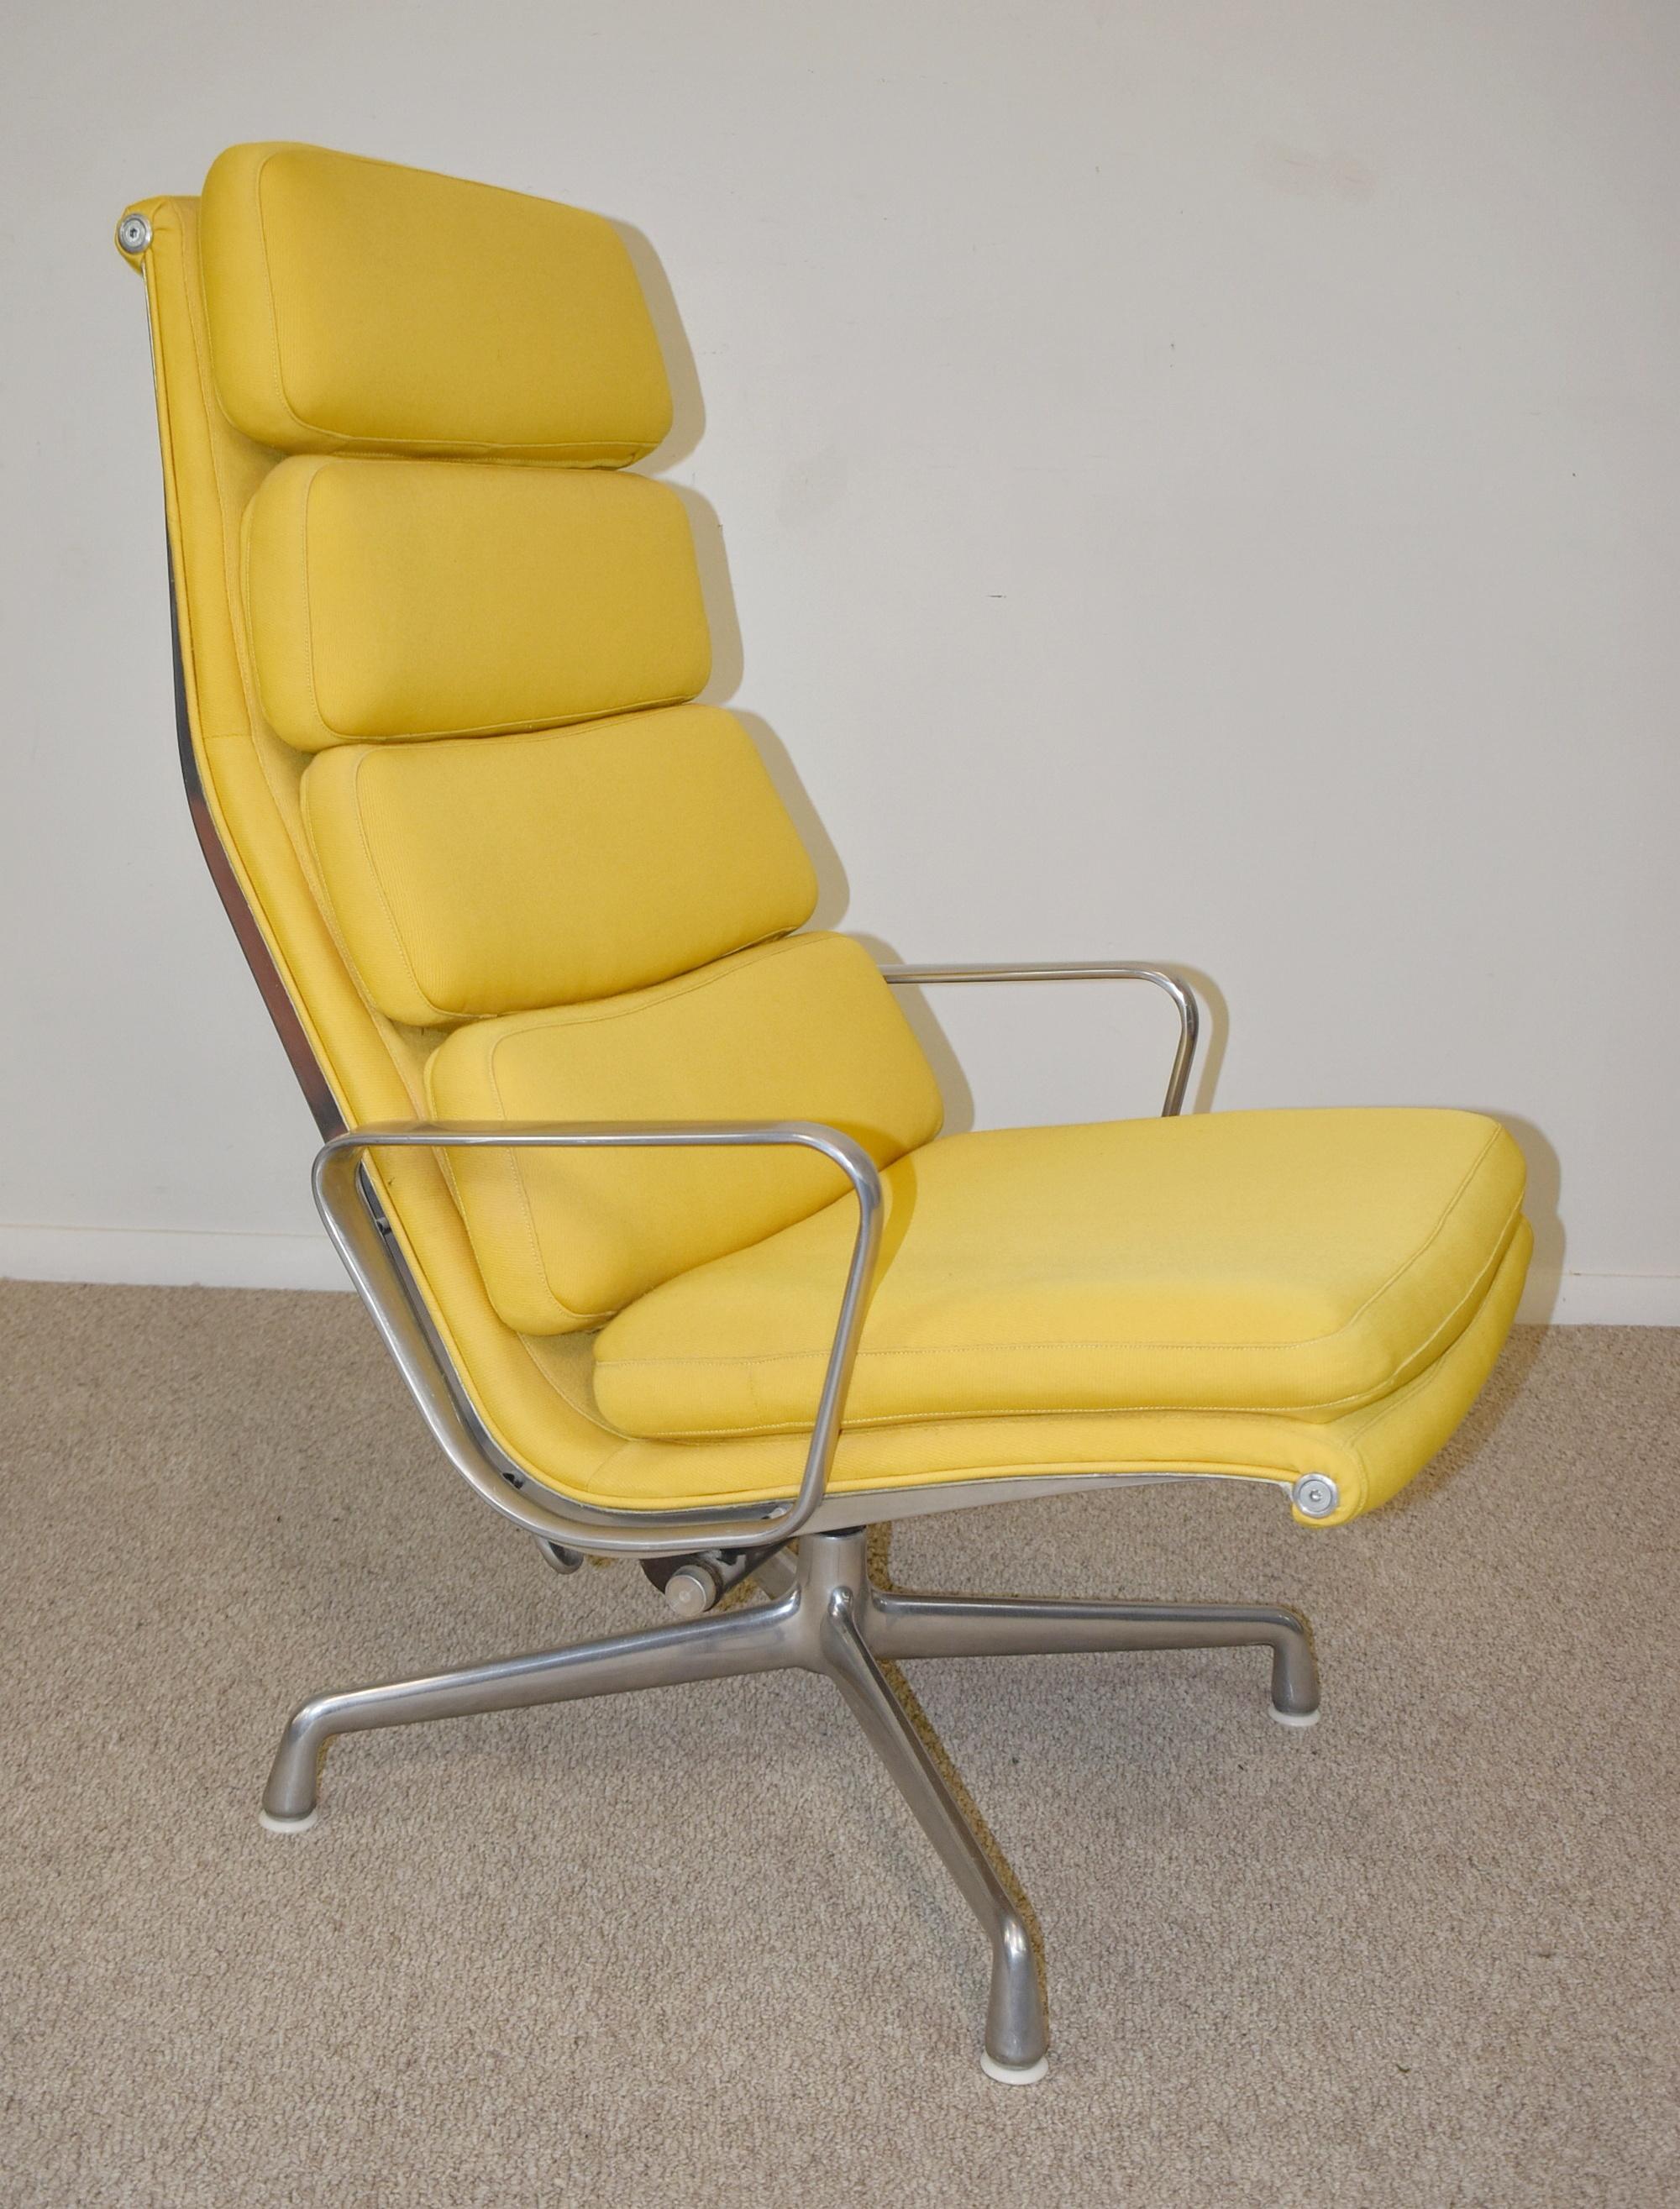 Eames soft pad chair, executive height in yellow for Herman Miller. A contoured aluminum frame, thick yellow fabric cushions and a swivel base. Great condition with minor wear due to age and use. Dimensions: 40